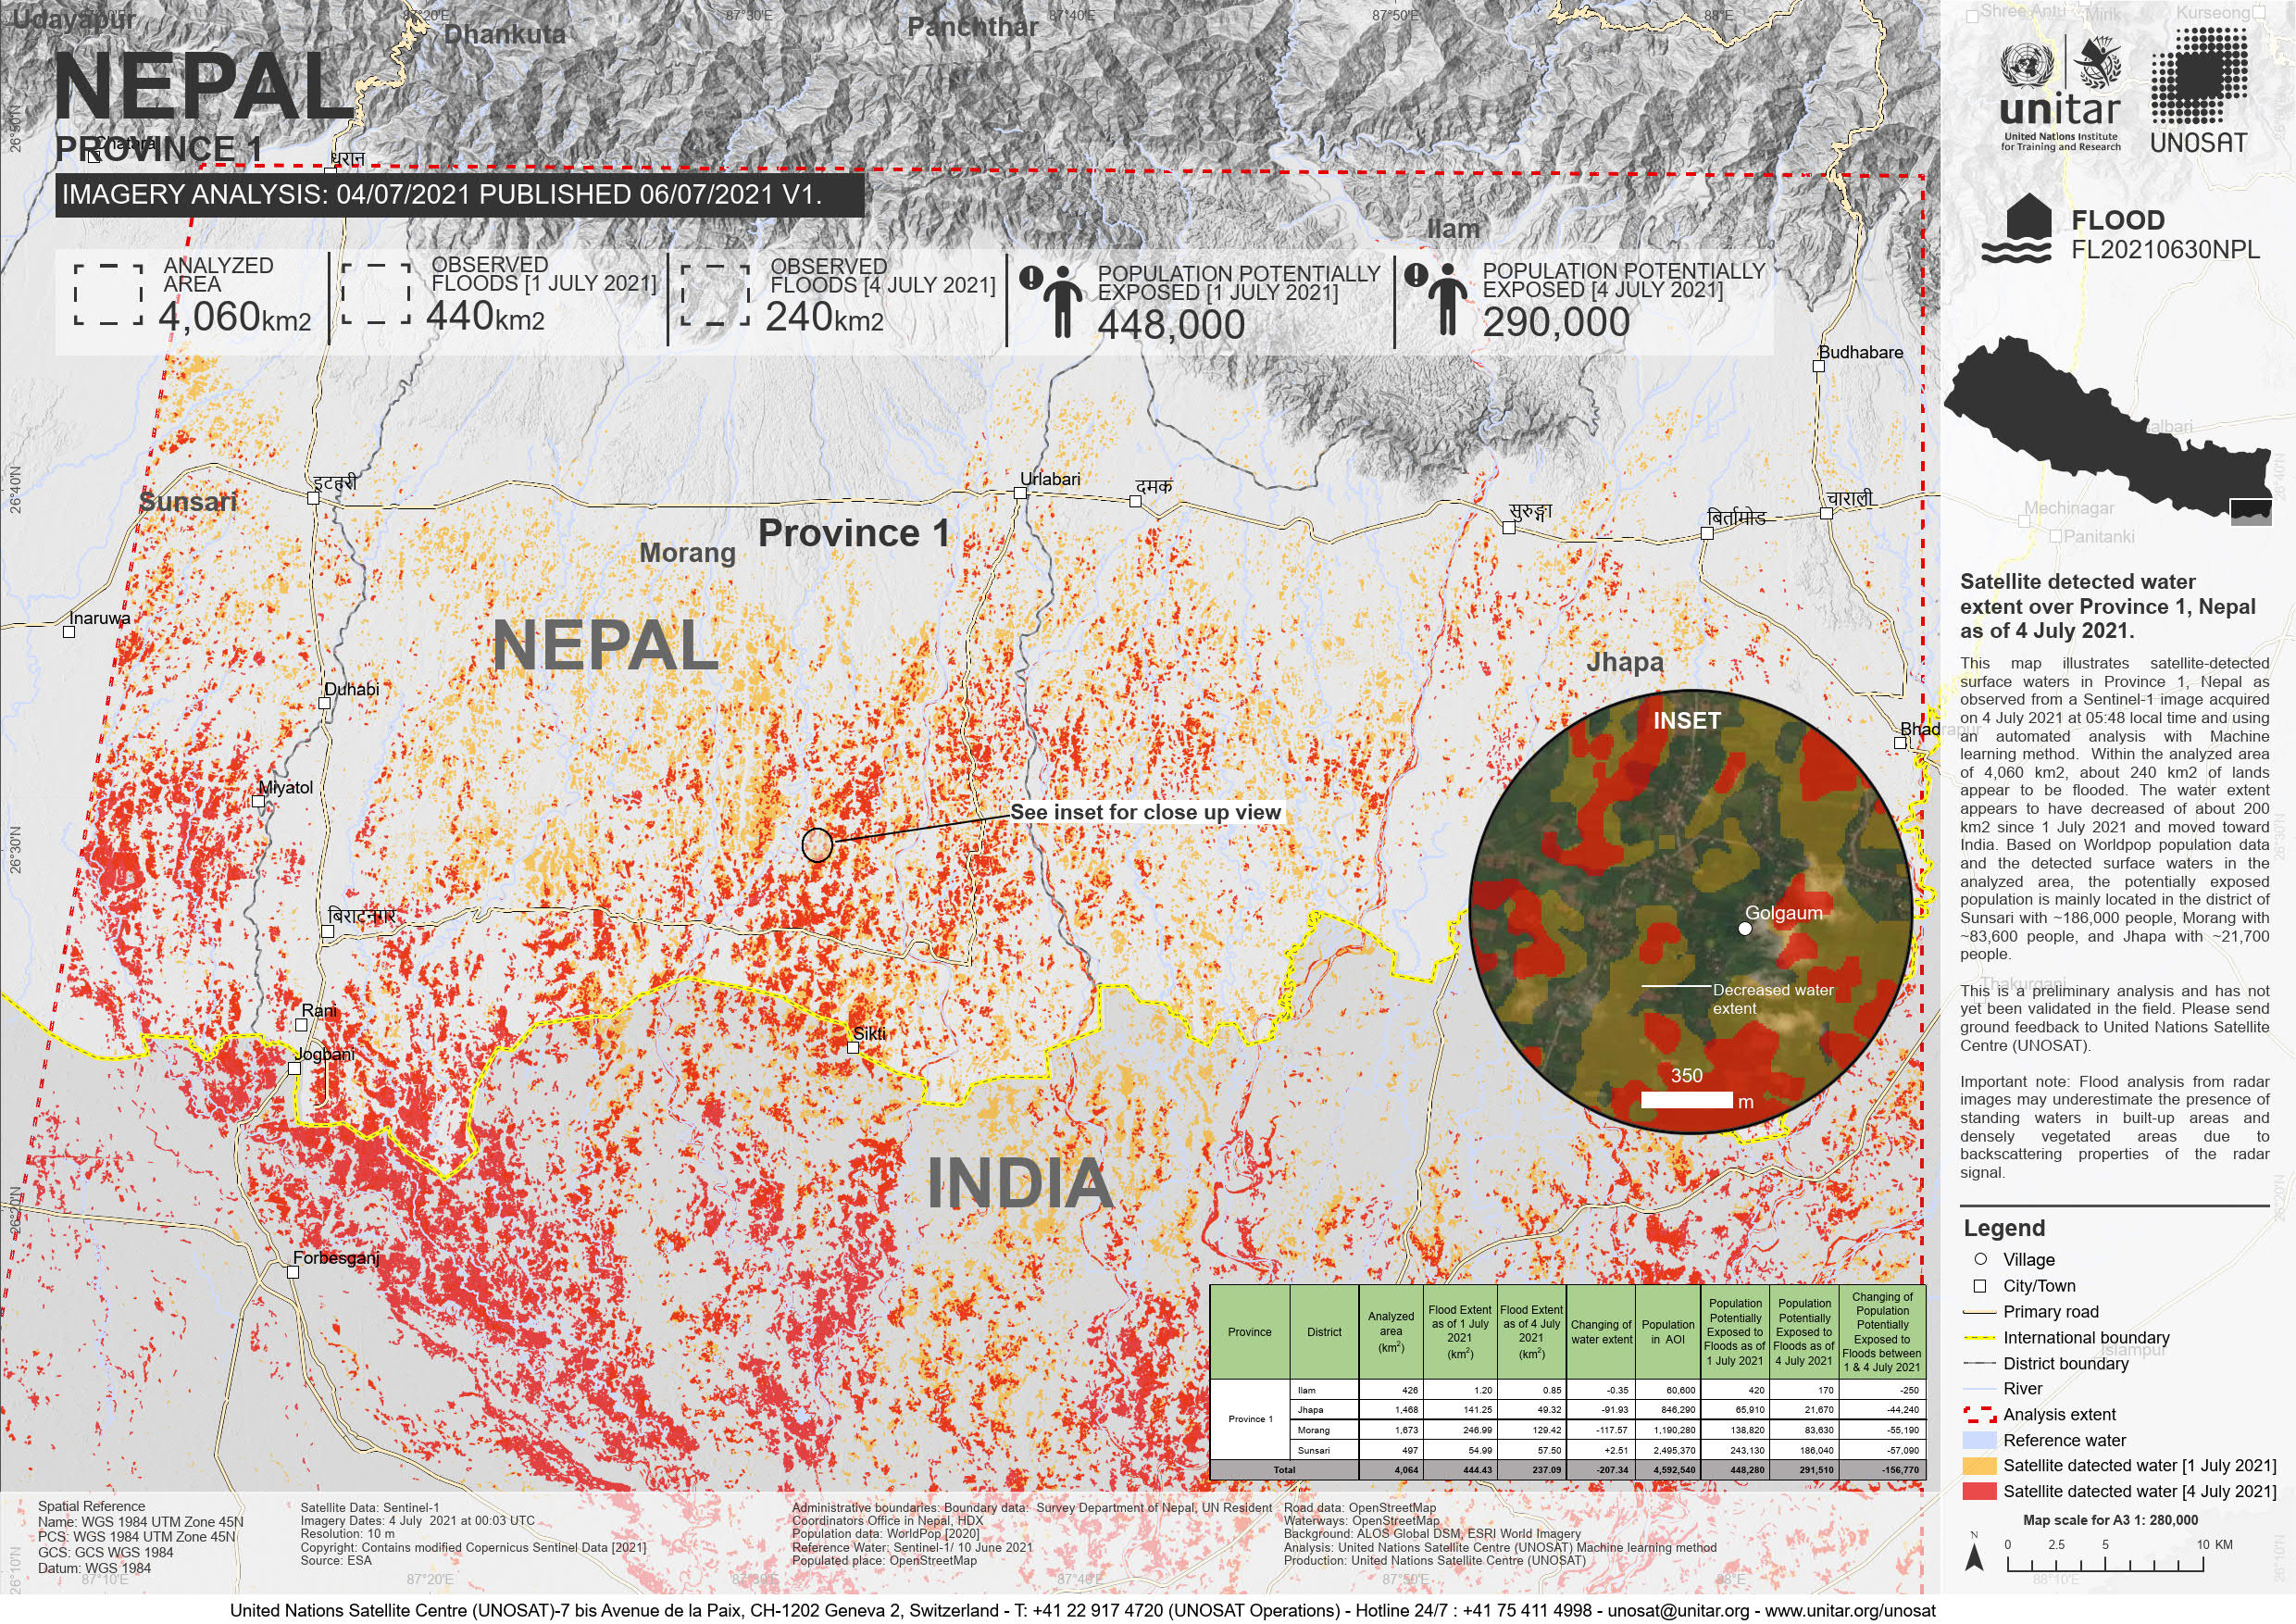 Satellite Detected Water Extent Over Province 1, Nepal as of 4 July 2021